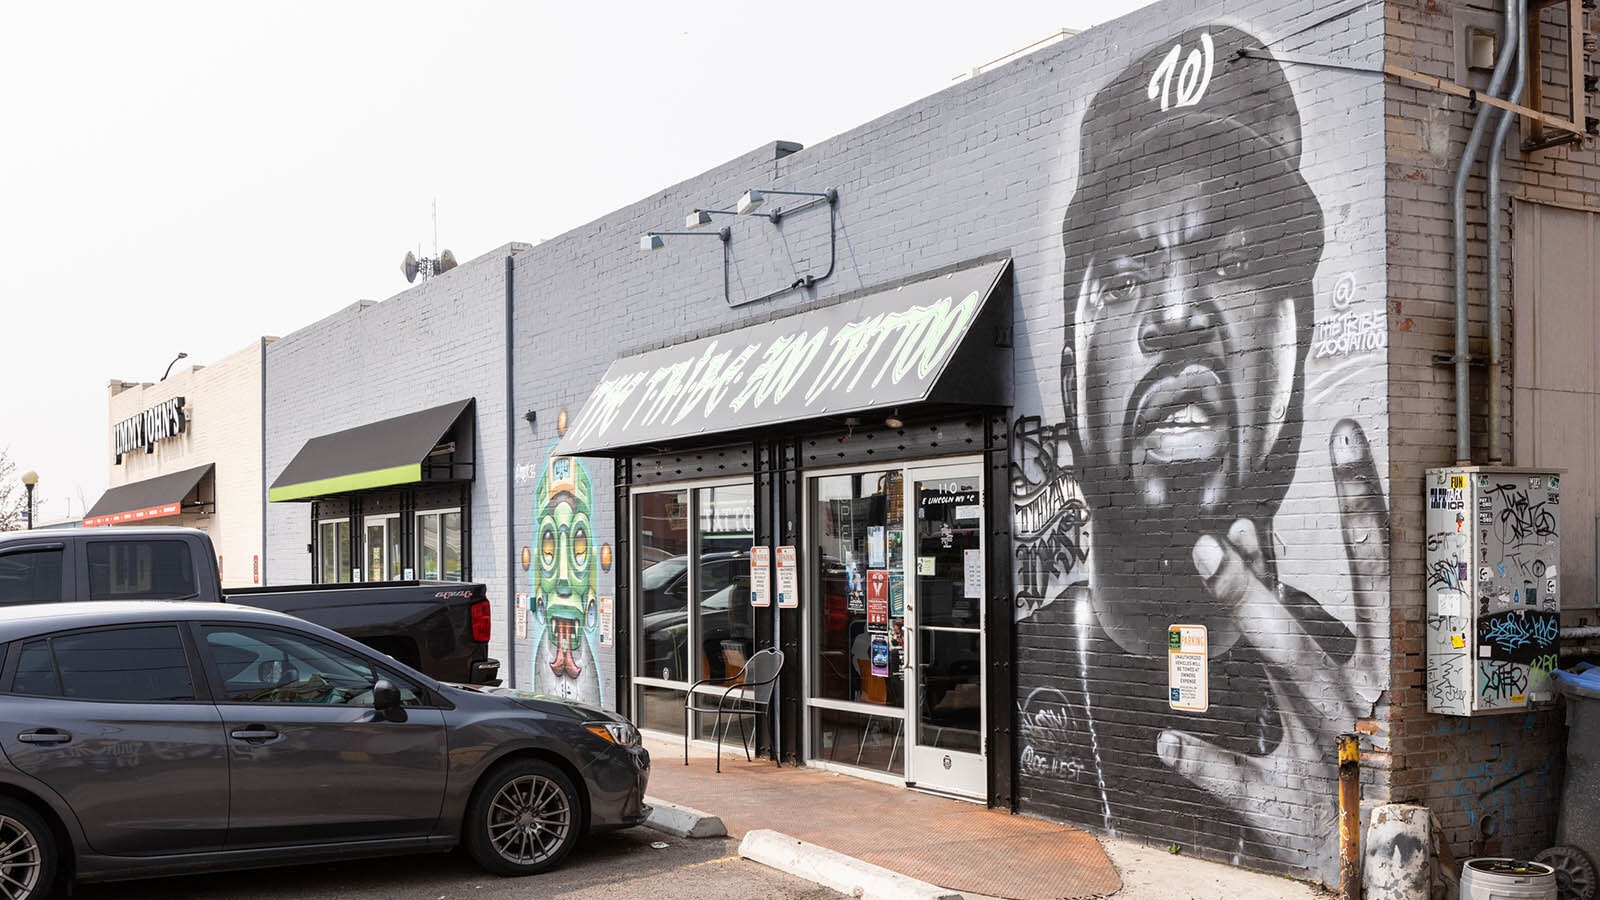 This series of photos show a stunning mural of rapper Ice Cube on the front of the T.R.I.B.E. tattoo shop. Ice Cube performed a sold-out show in Cheyenne in April.